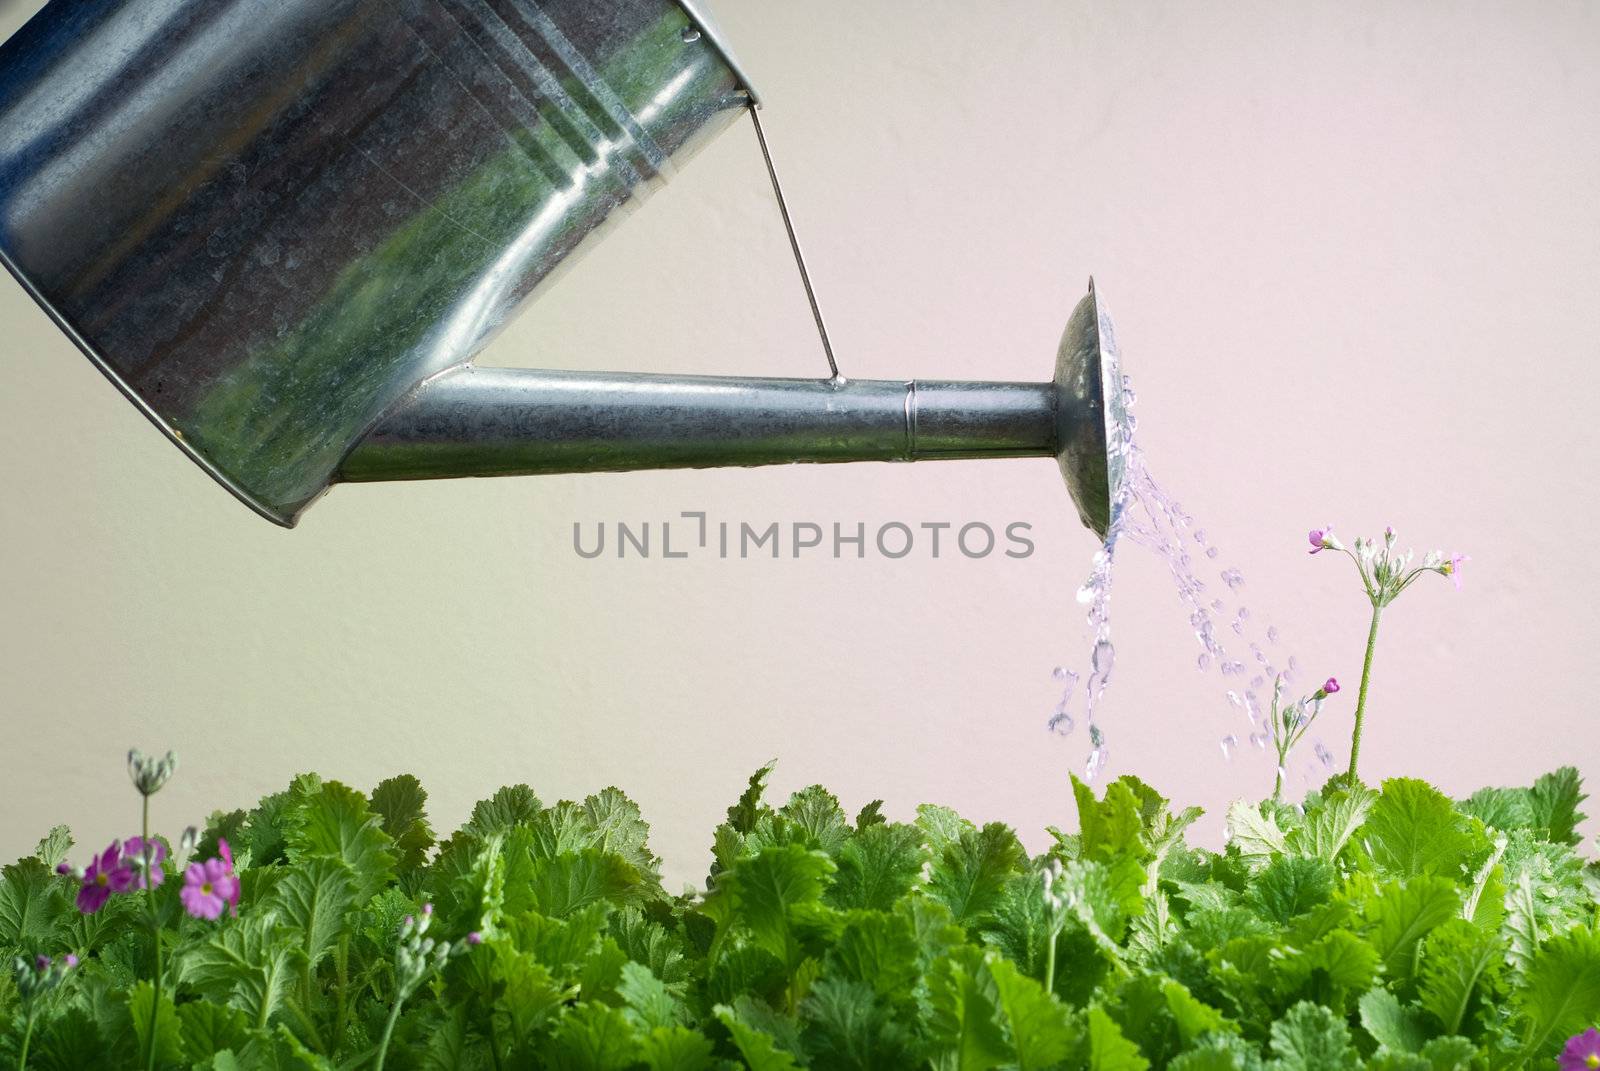 Stainless Steel Watering Can Used for Gardening by alistaircotton